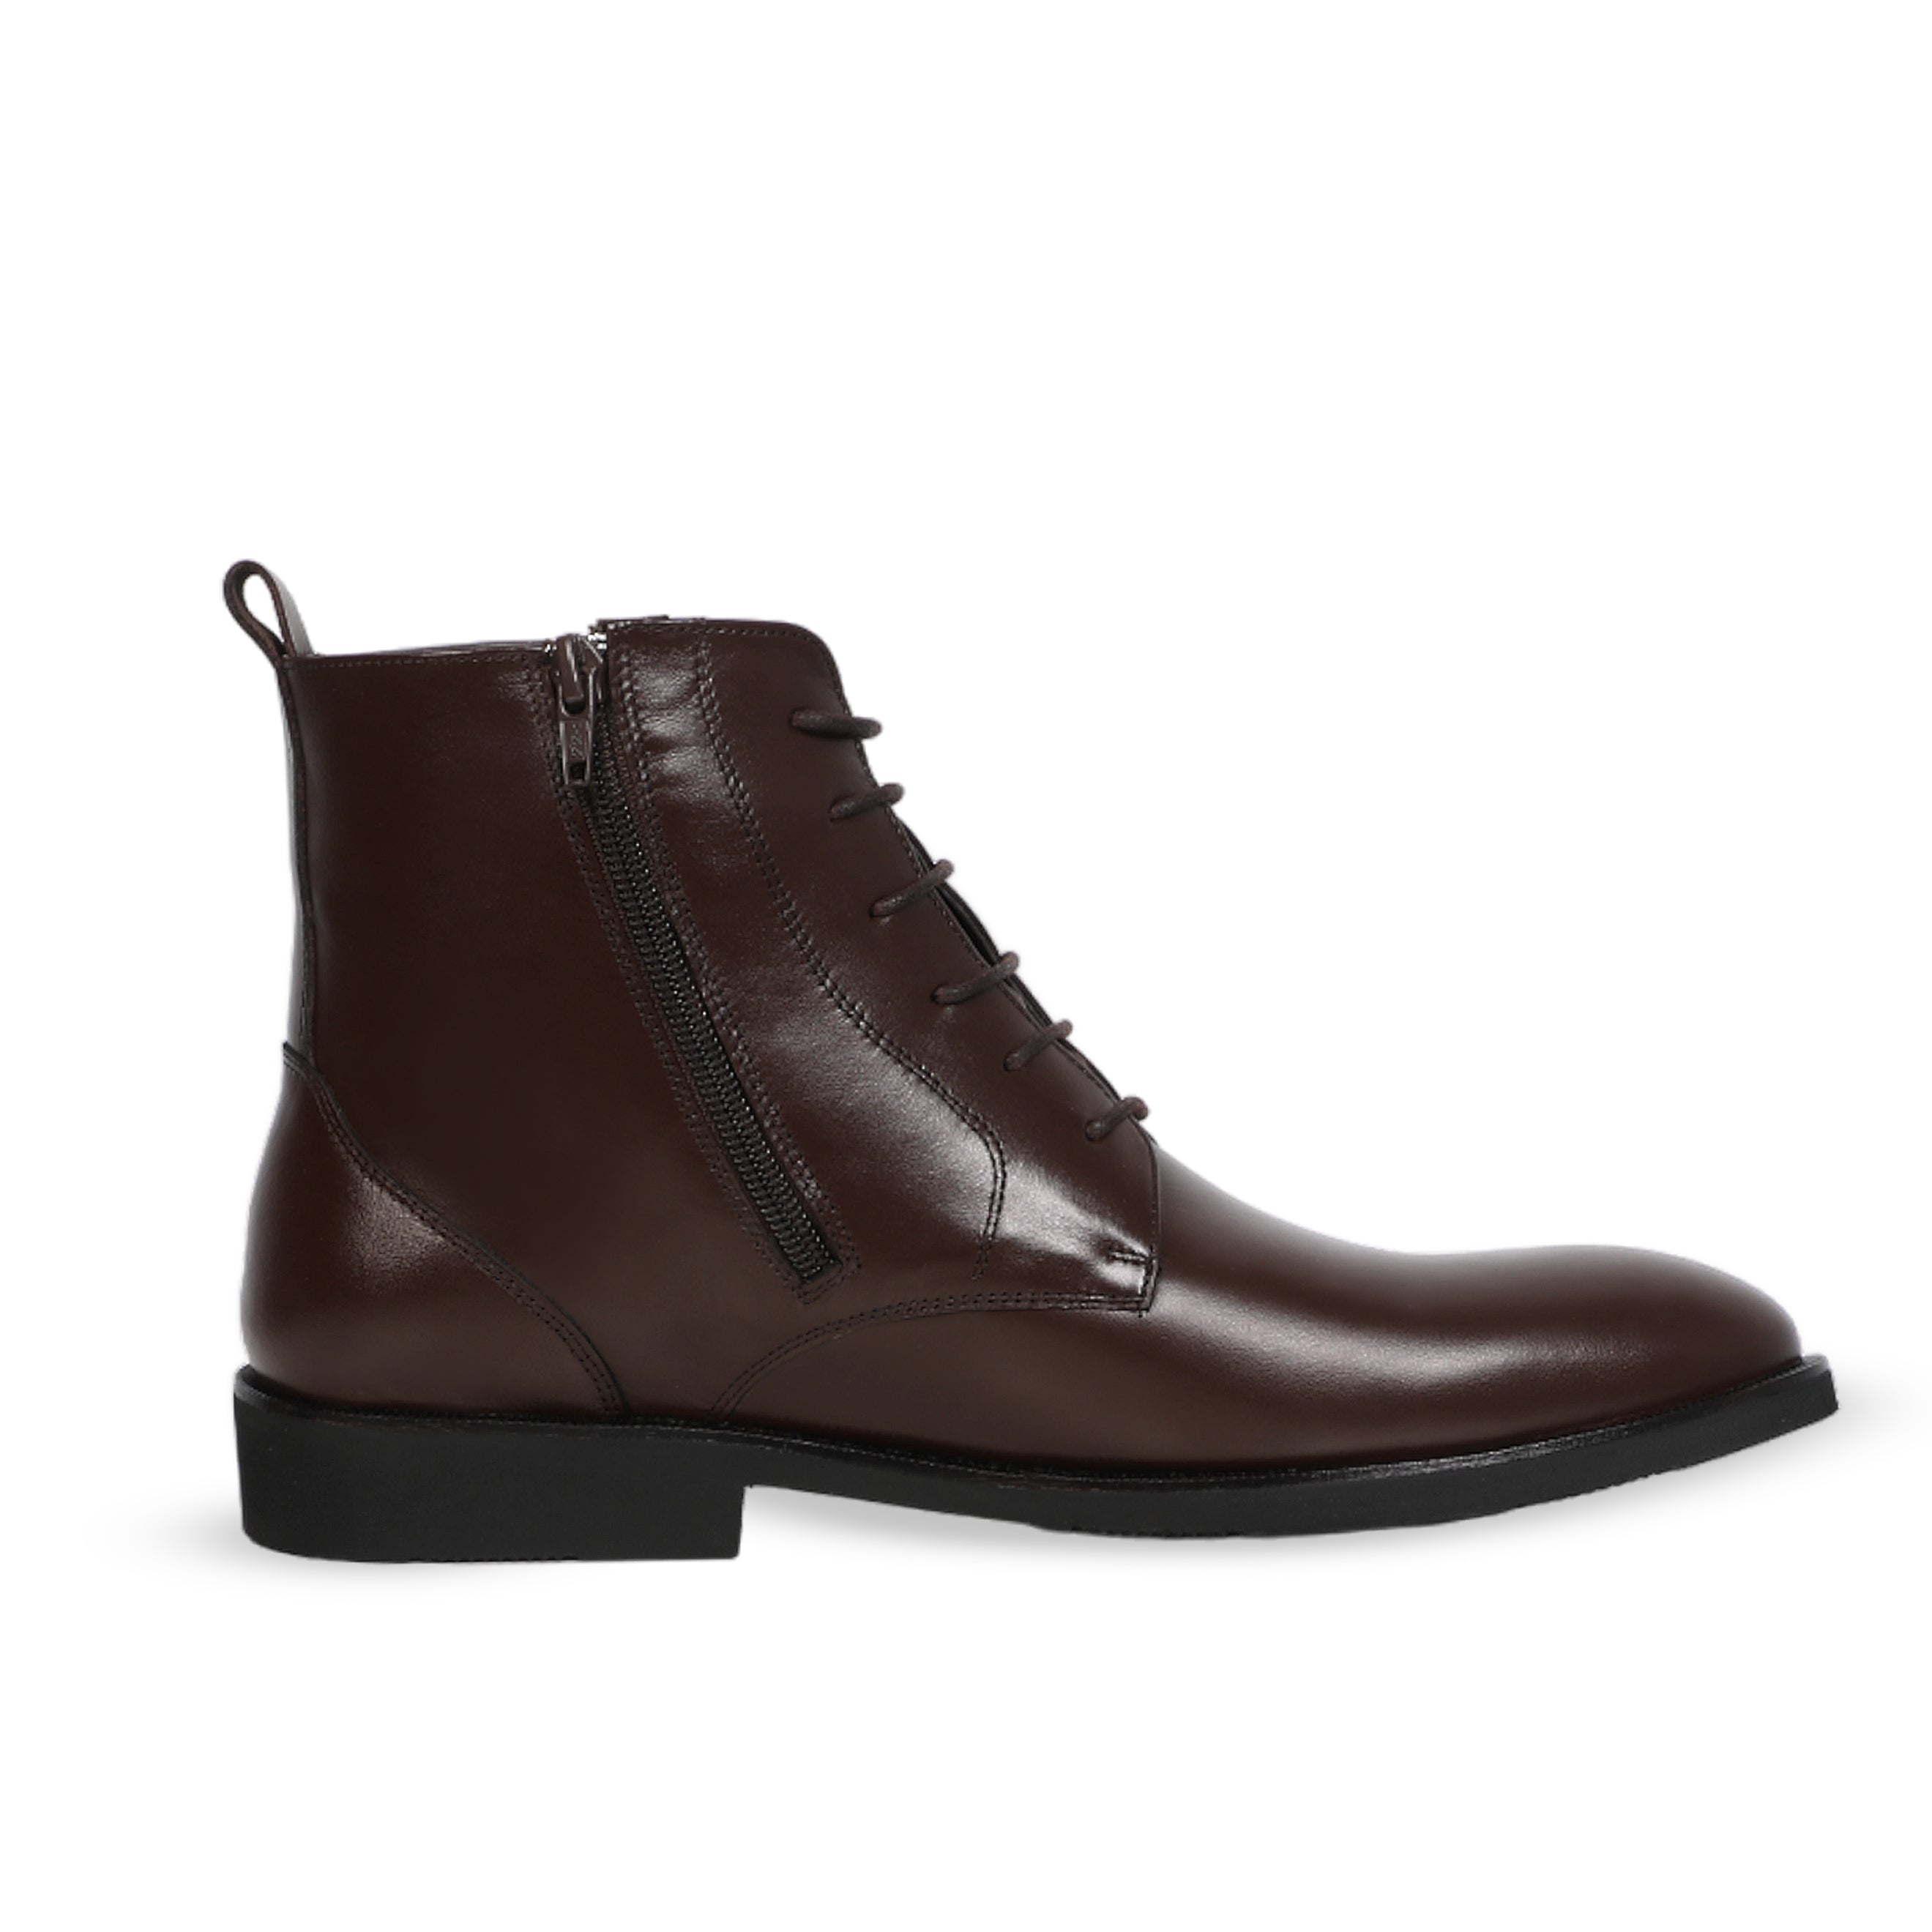 Moustache's Side Zipped Brown Laced Boots